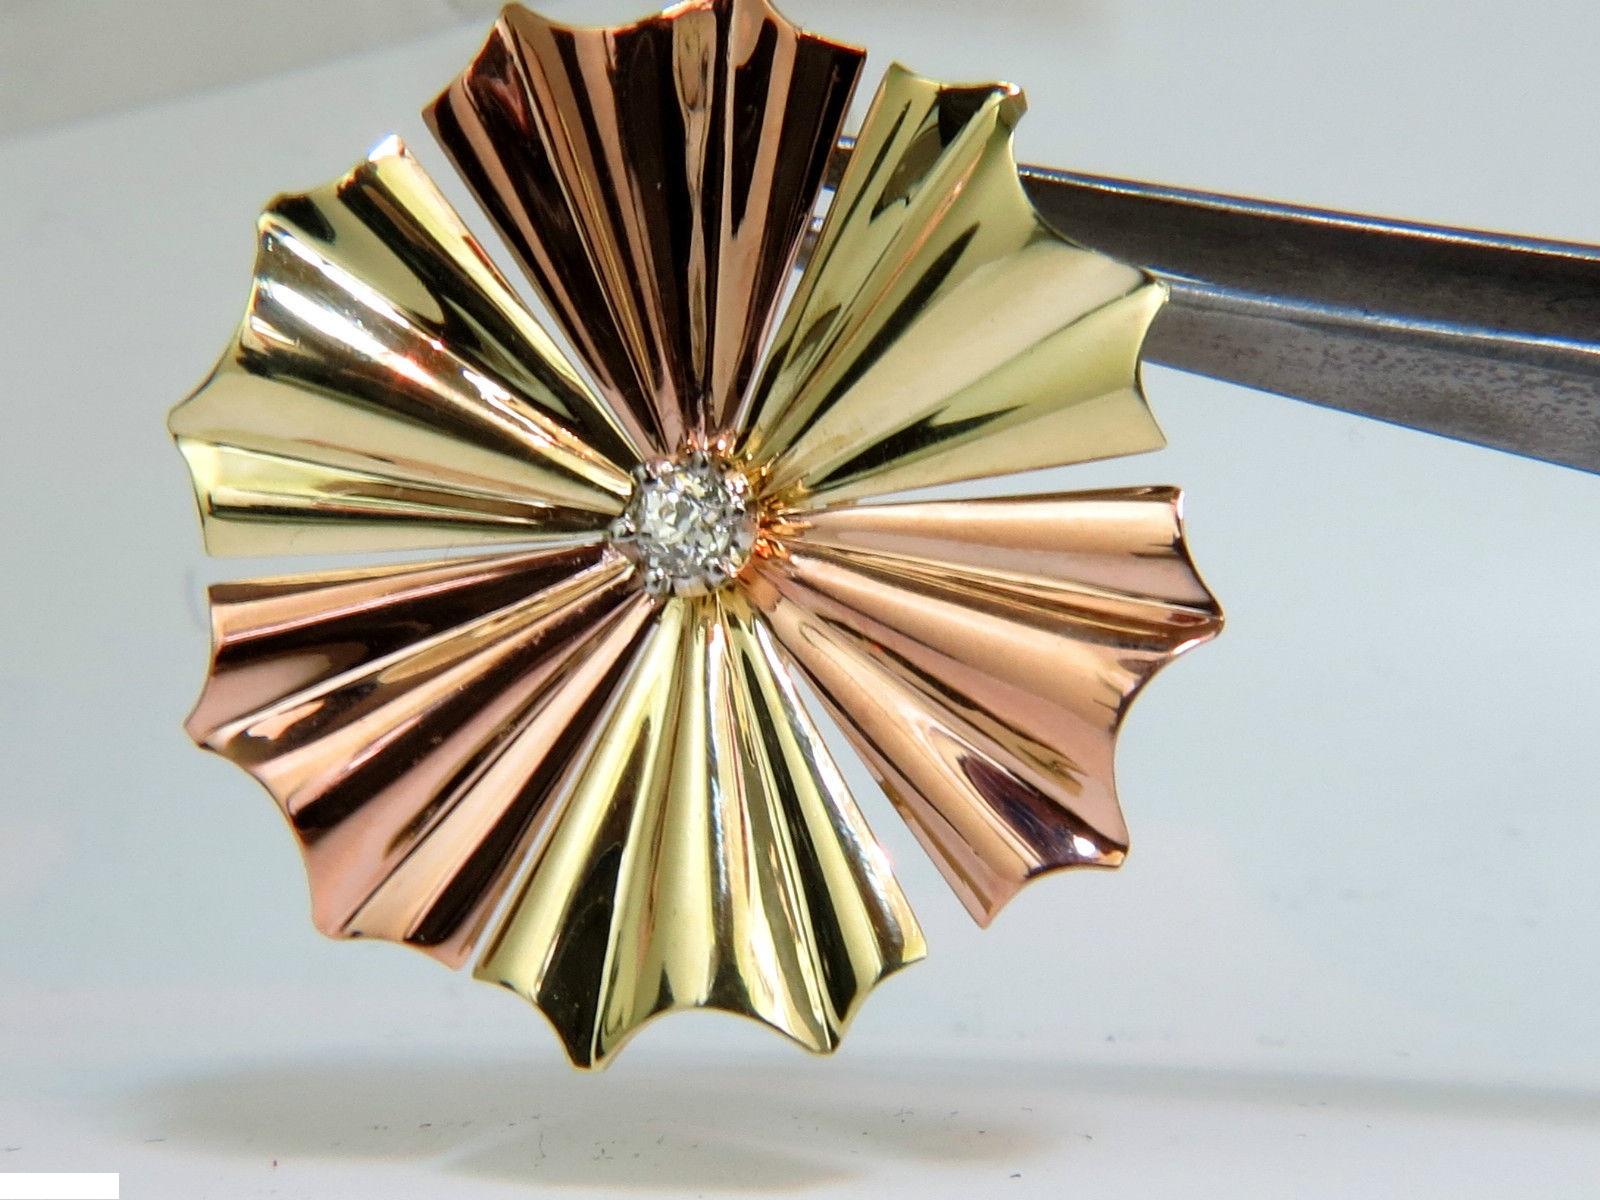 .30ct. diamond 

1970's Sunburst Mod Deco Brooch

3D effect gold glitter from all sides


Diamond: Si-1 clarity, H-color

marked 14kt.

7.1 grams

42 mm in diameter

excellent condition

$1800 Appraisal will accompany